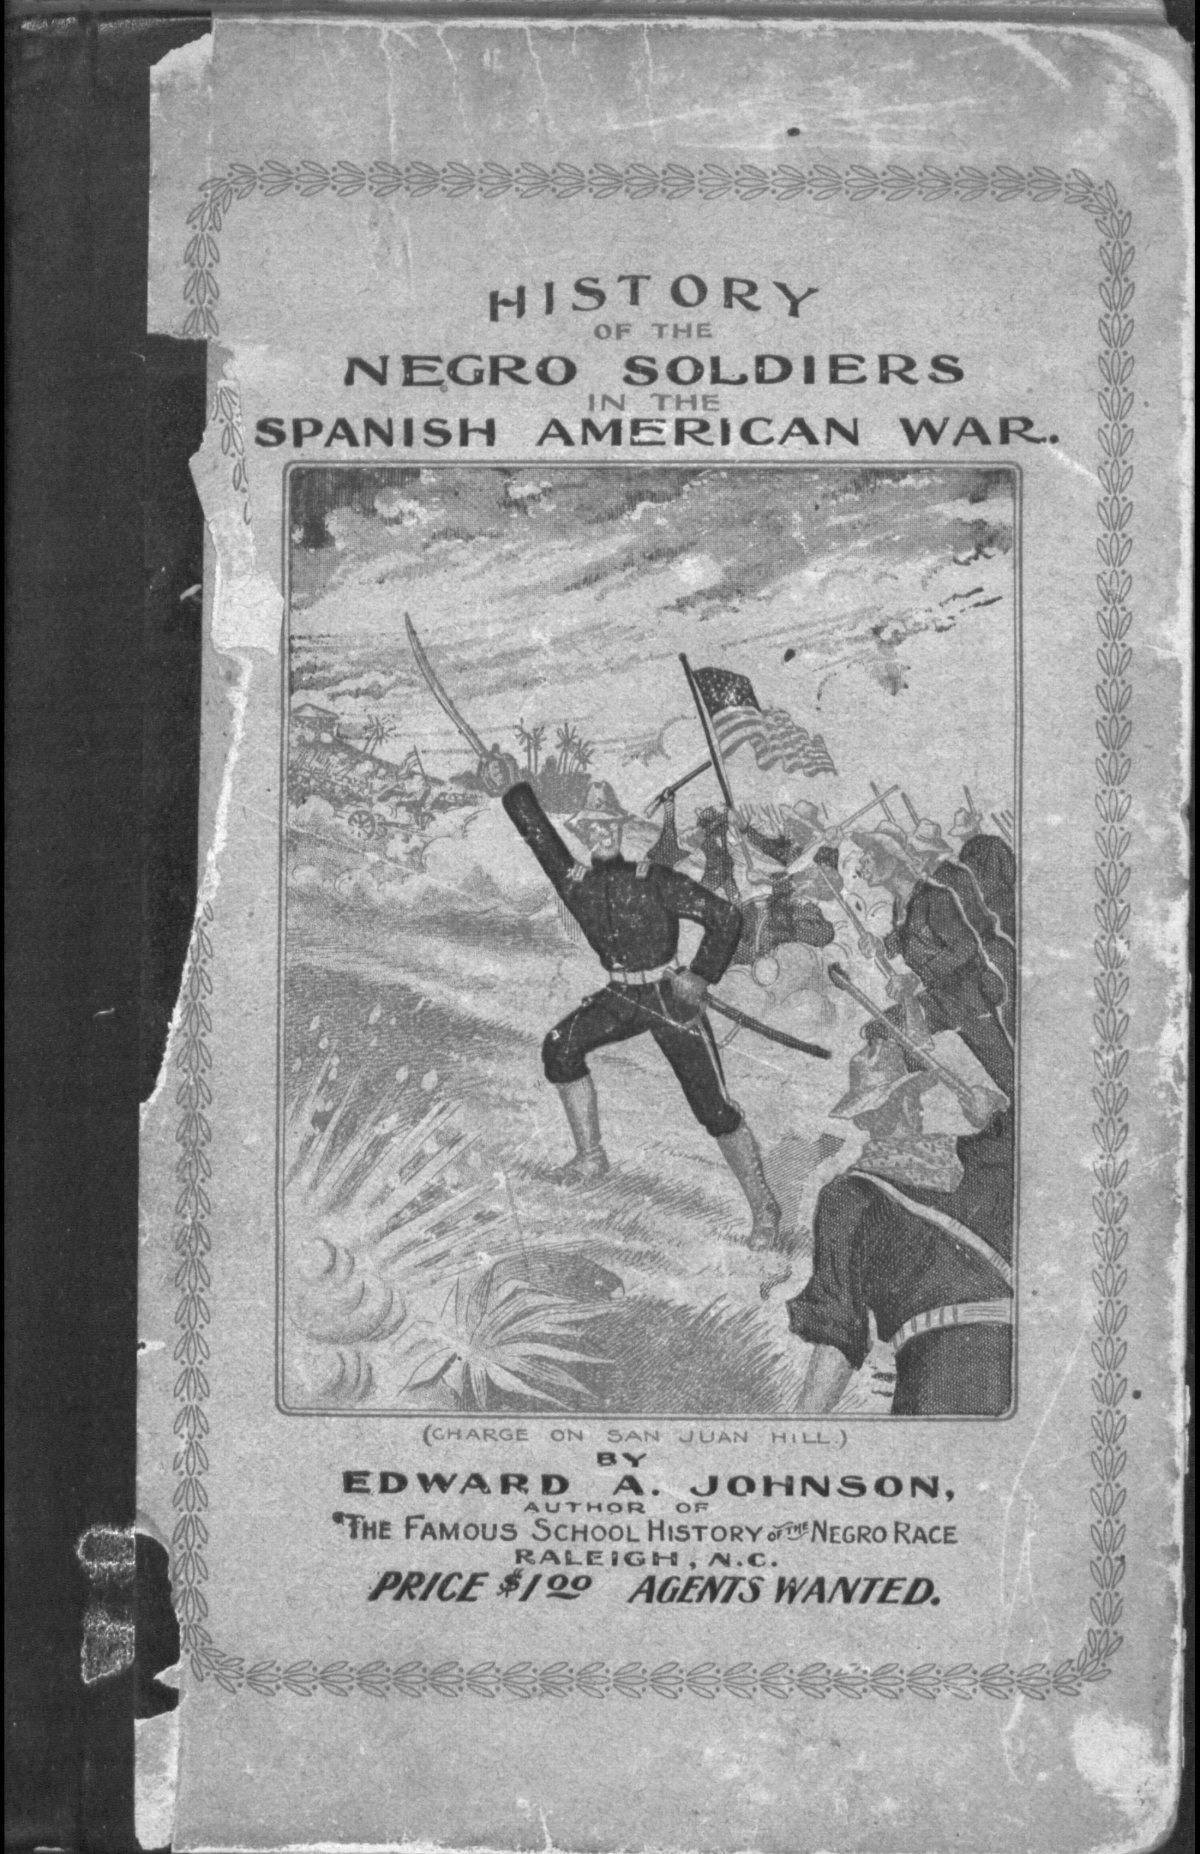 A scan of the cover of the 